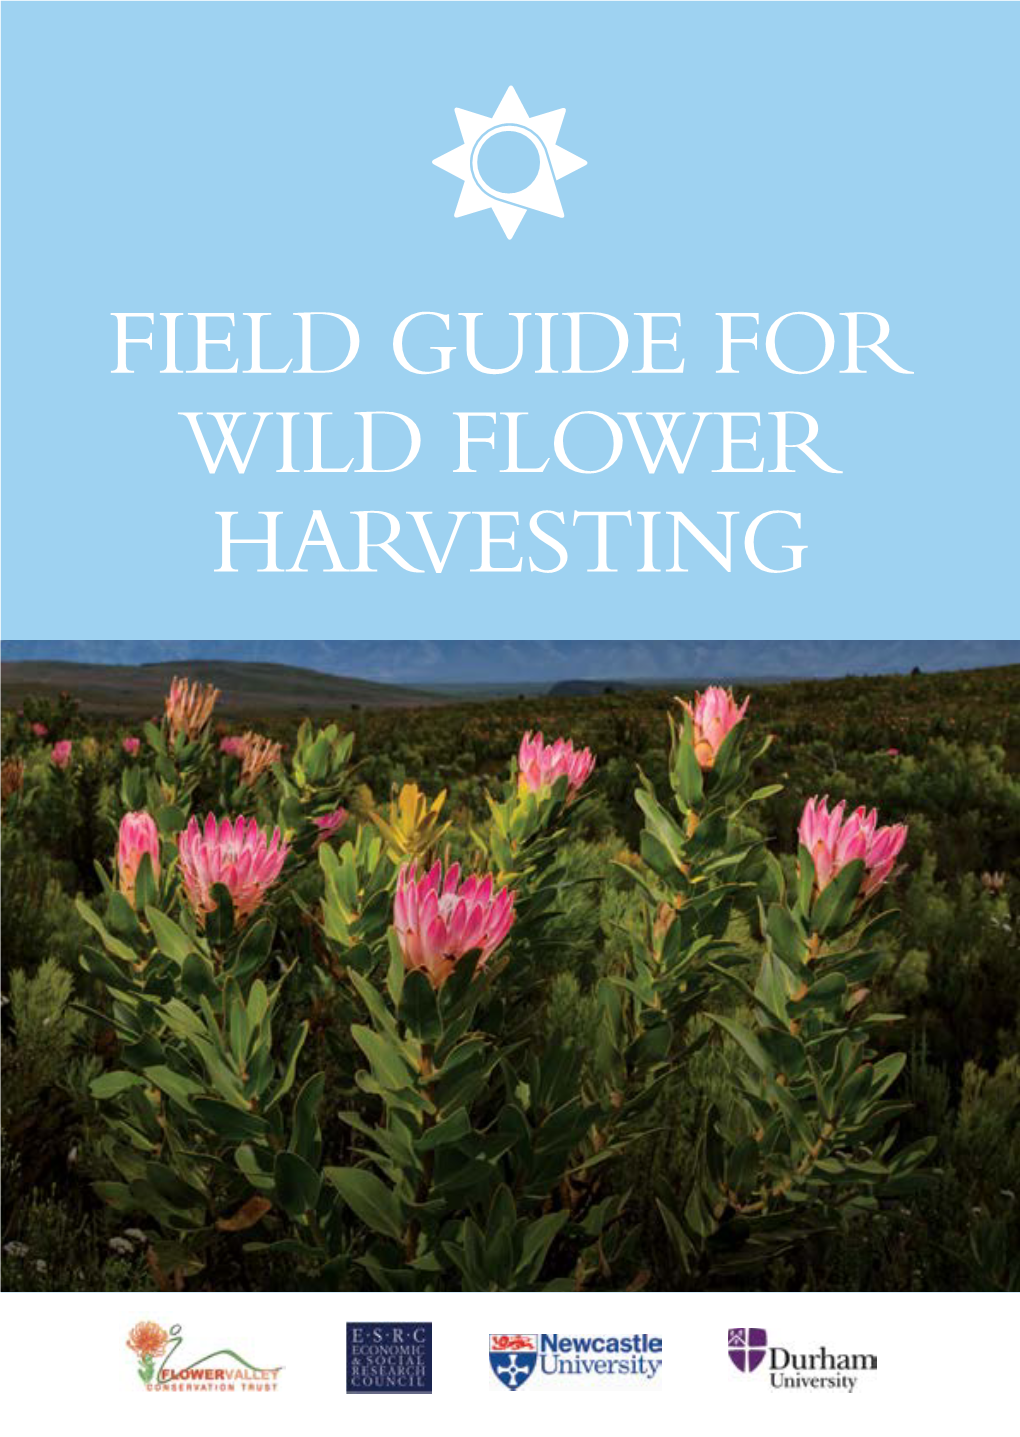 FIELD GUIDE for WILD FLOWER HARVESTING Introducing the Pocket Field Guide South Africa’S Plants for Wild Flower Harvesting